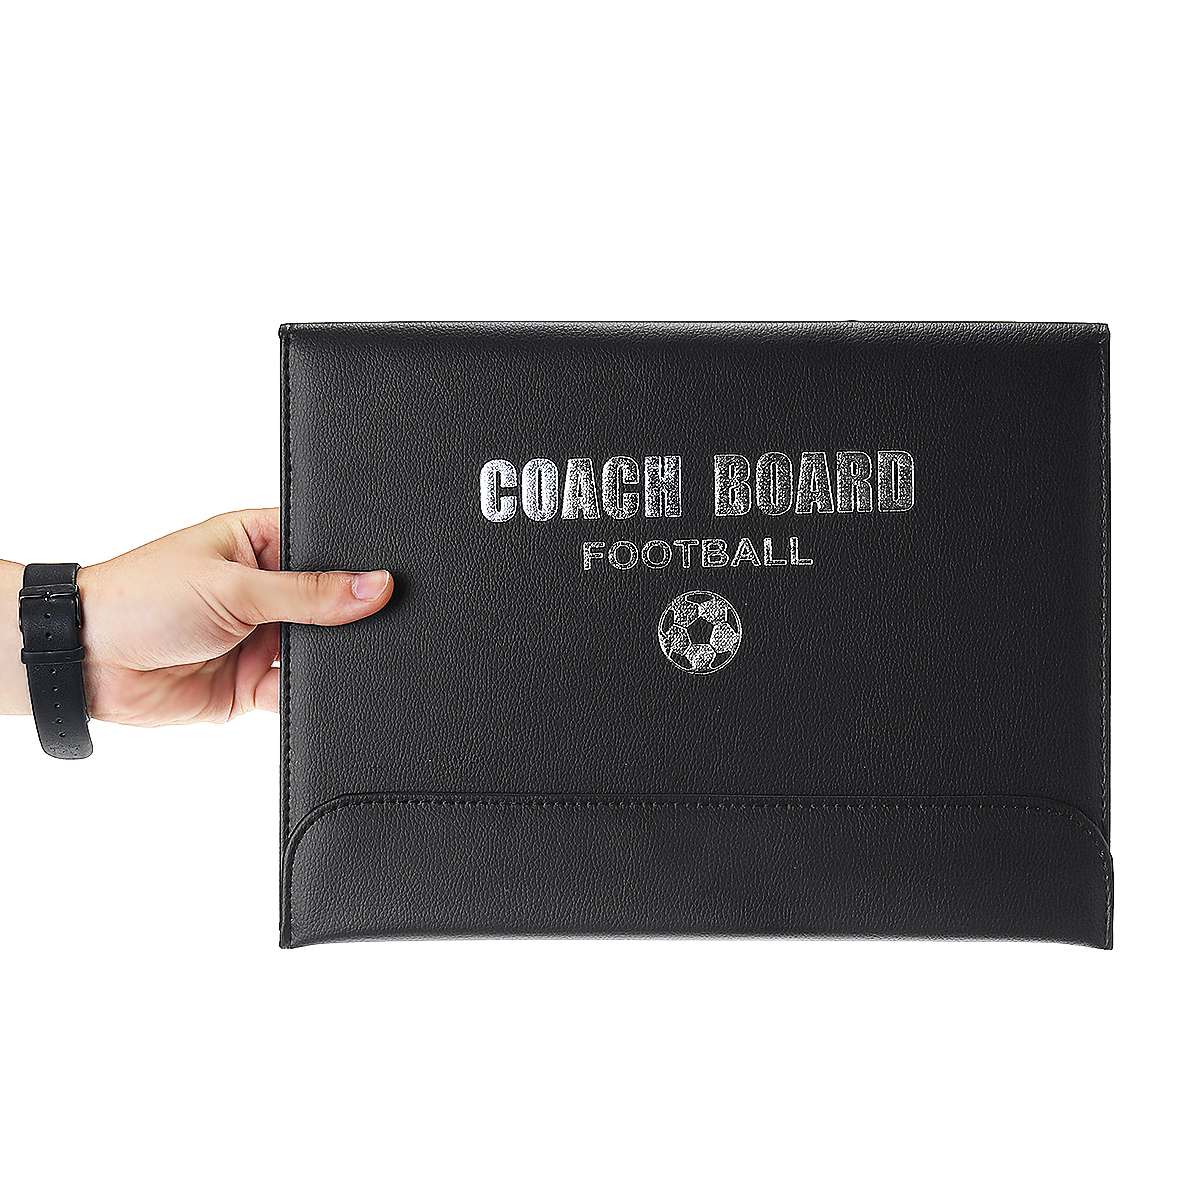 Foldable Magnetic Tactic Board Soccer Coaching Coaches Tactical Board Football Game Portable Football Training Tactics Clipboard